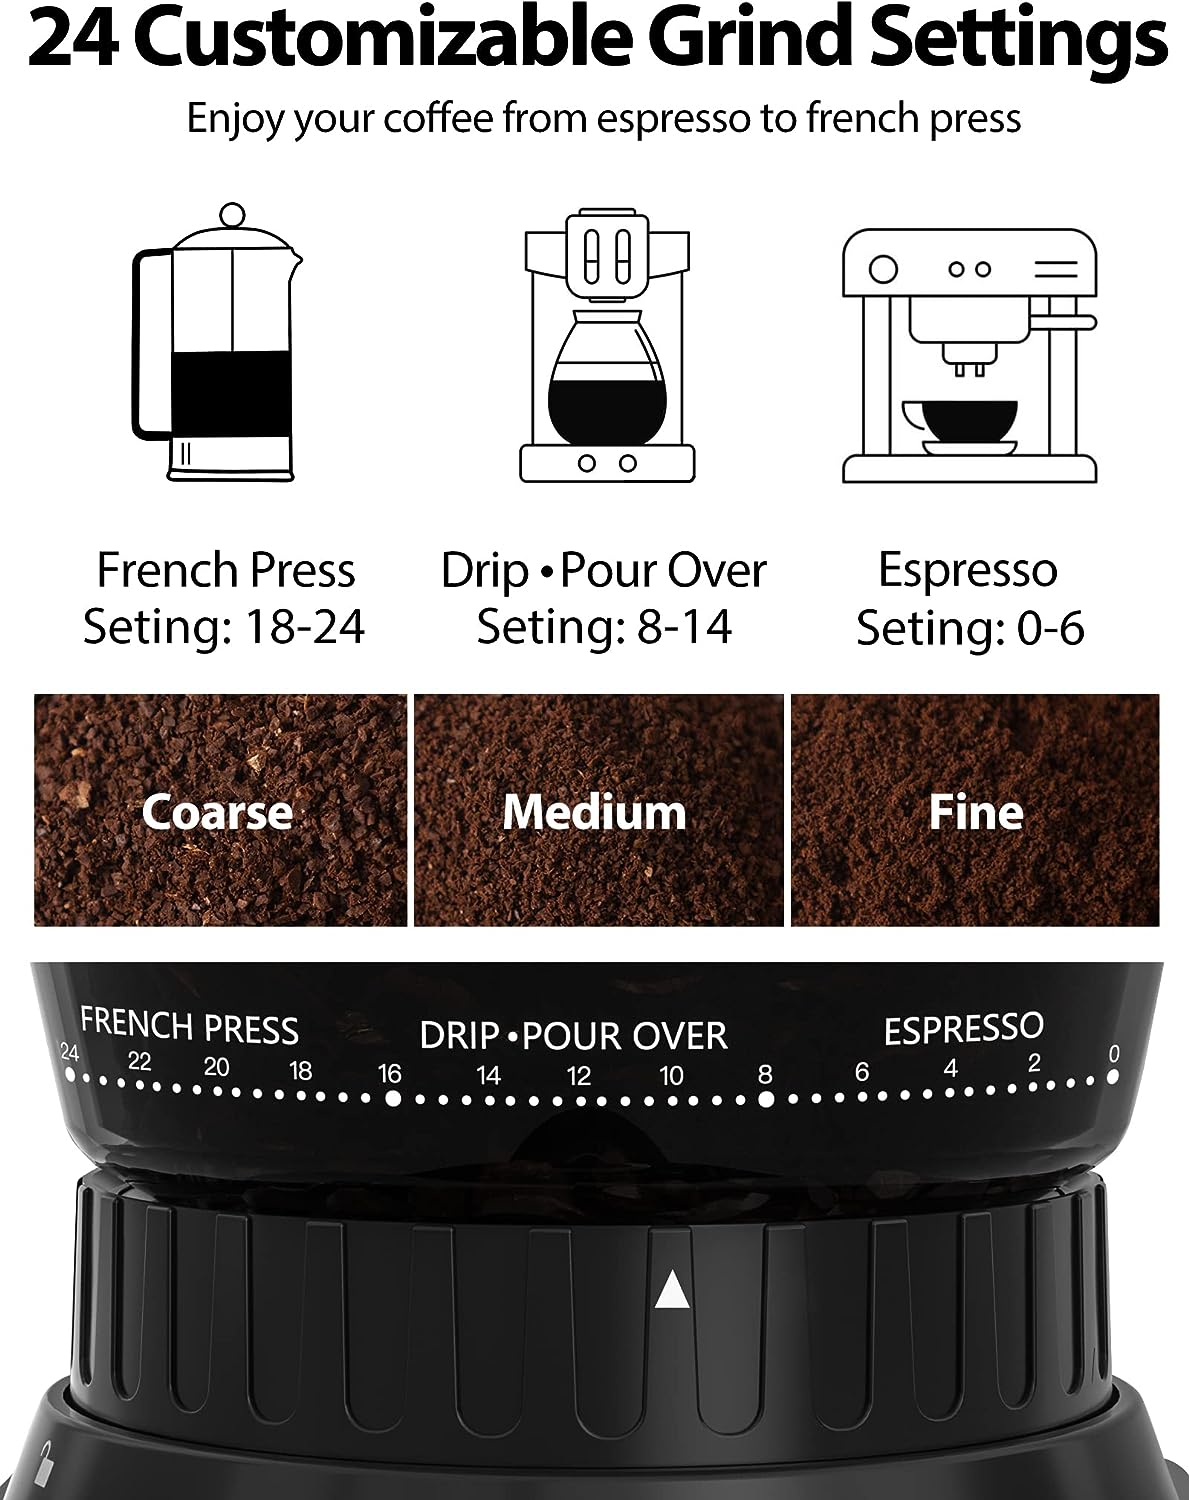 Coffee Grinder Electric,Aromaster Burr Coffee Grinder,Stainless Steel Electric Coffee Bean Grinder with 24 Grind Settings,Grind Timer,Espresso/Drip/Pour Over/Cold Brew/French Press Coffee Maker